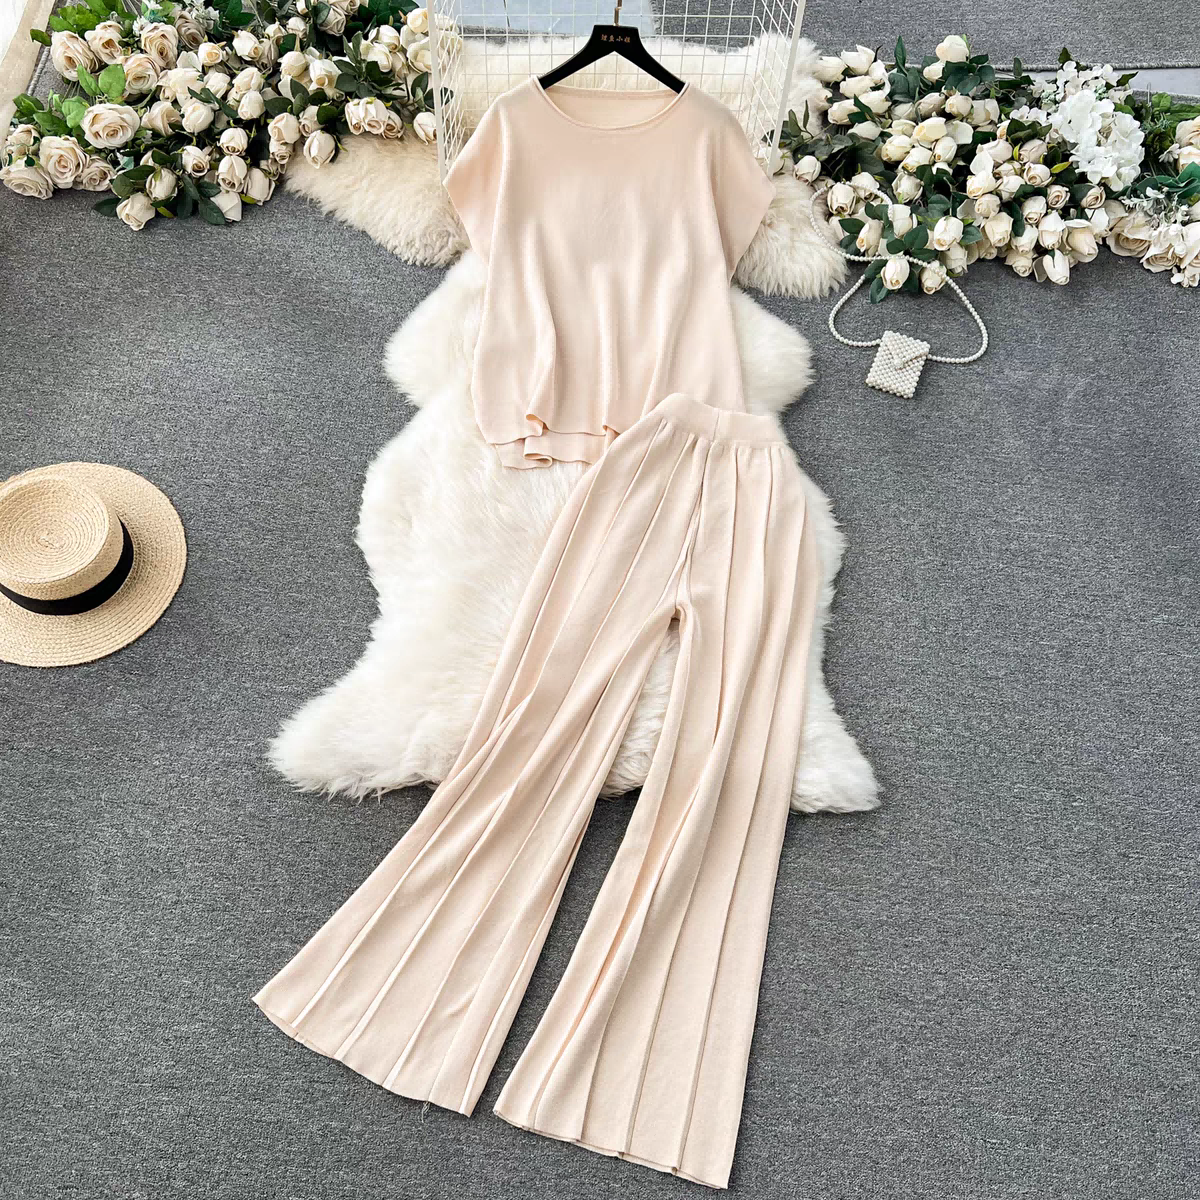 Women Lazy Style Wear Solid Color Knitted Top Loose Slimming High Waist Wide Leg Pants Fashion Two piece Suit Spring Clothes